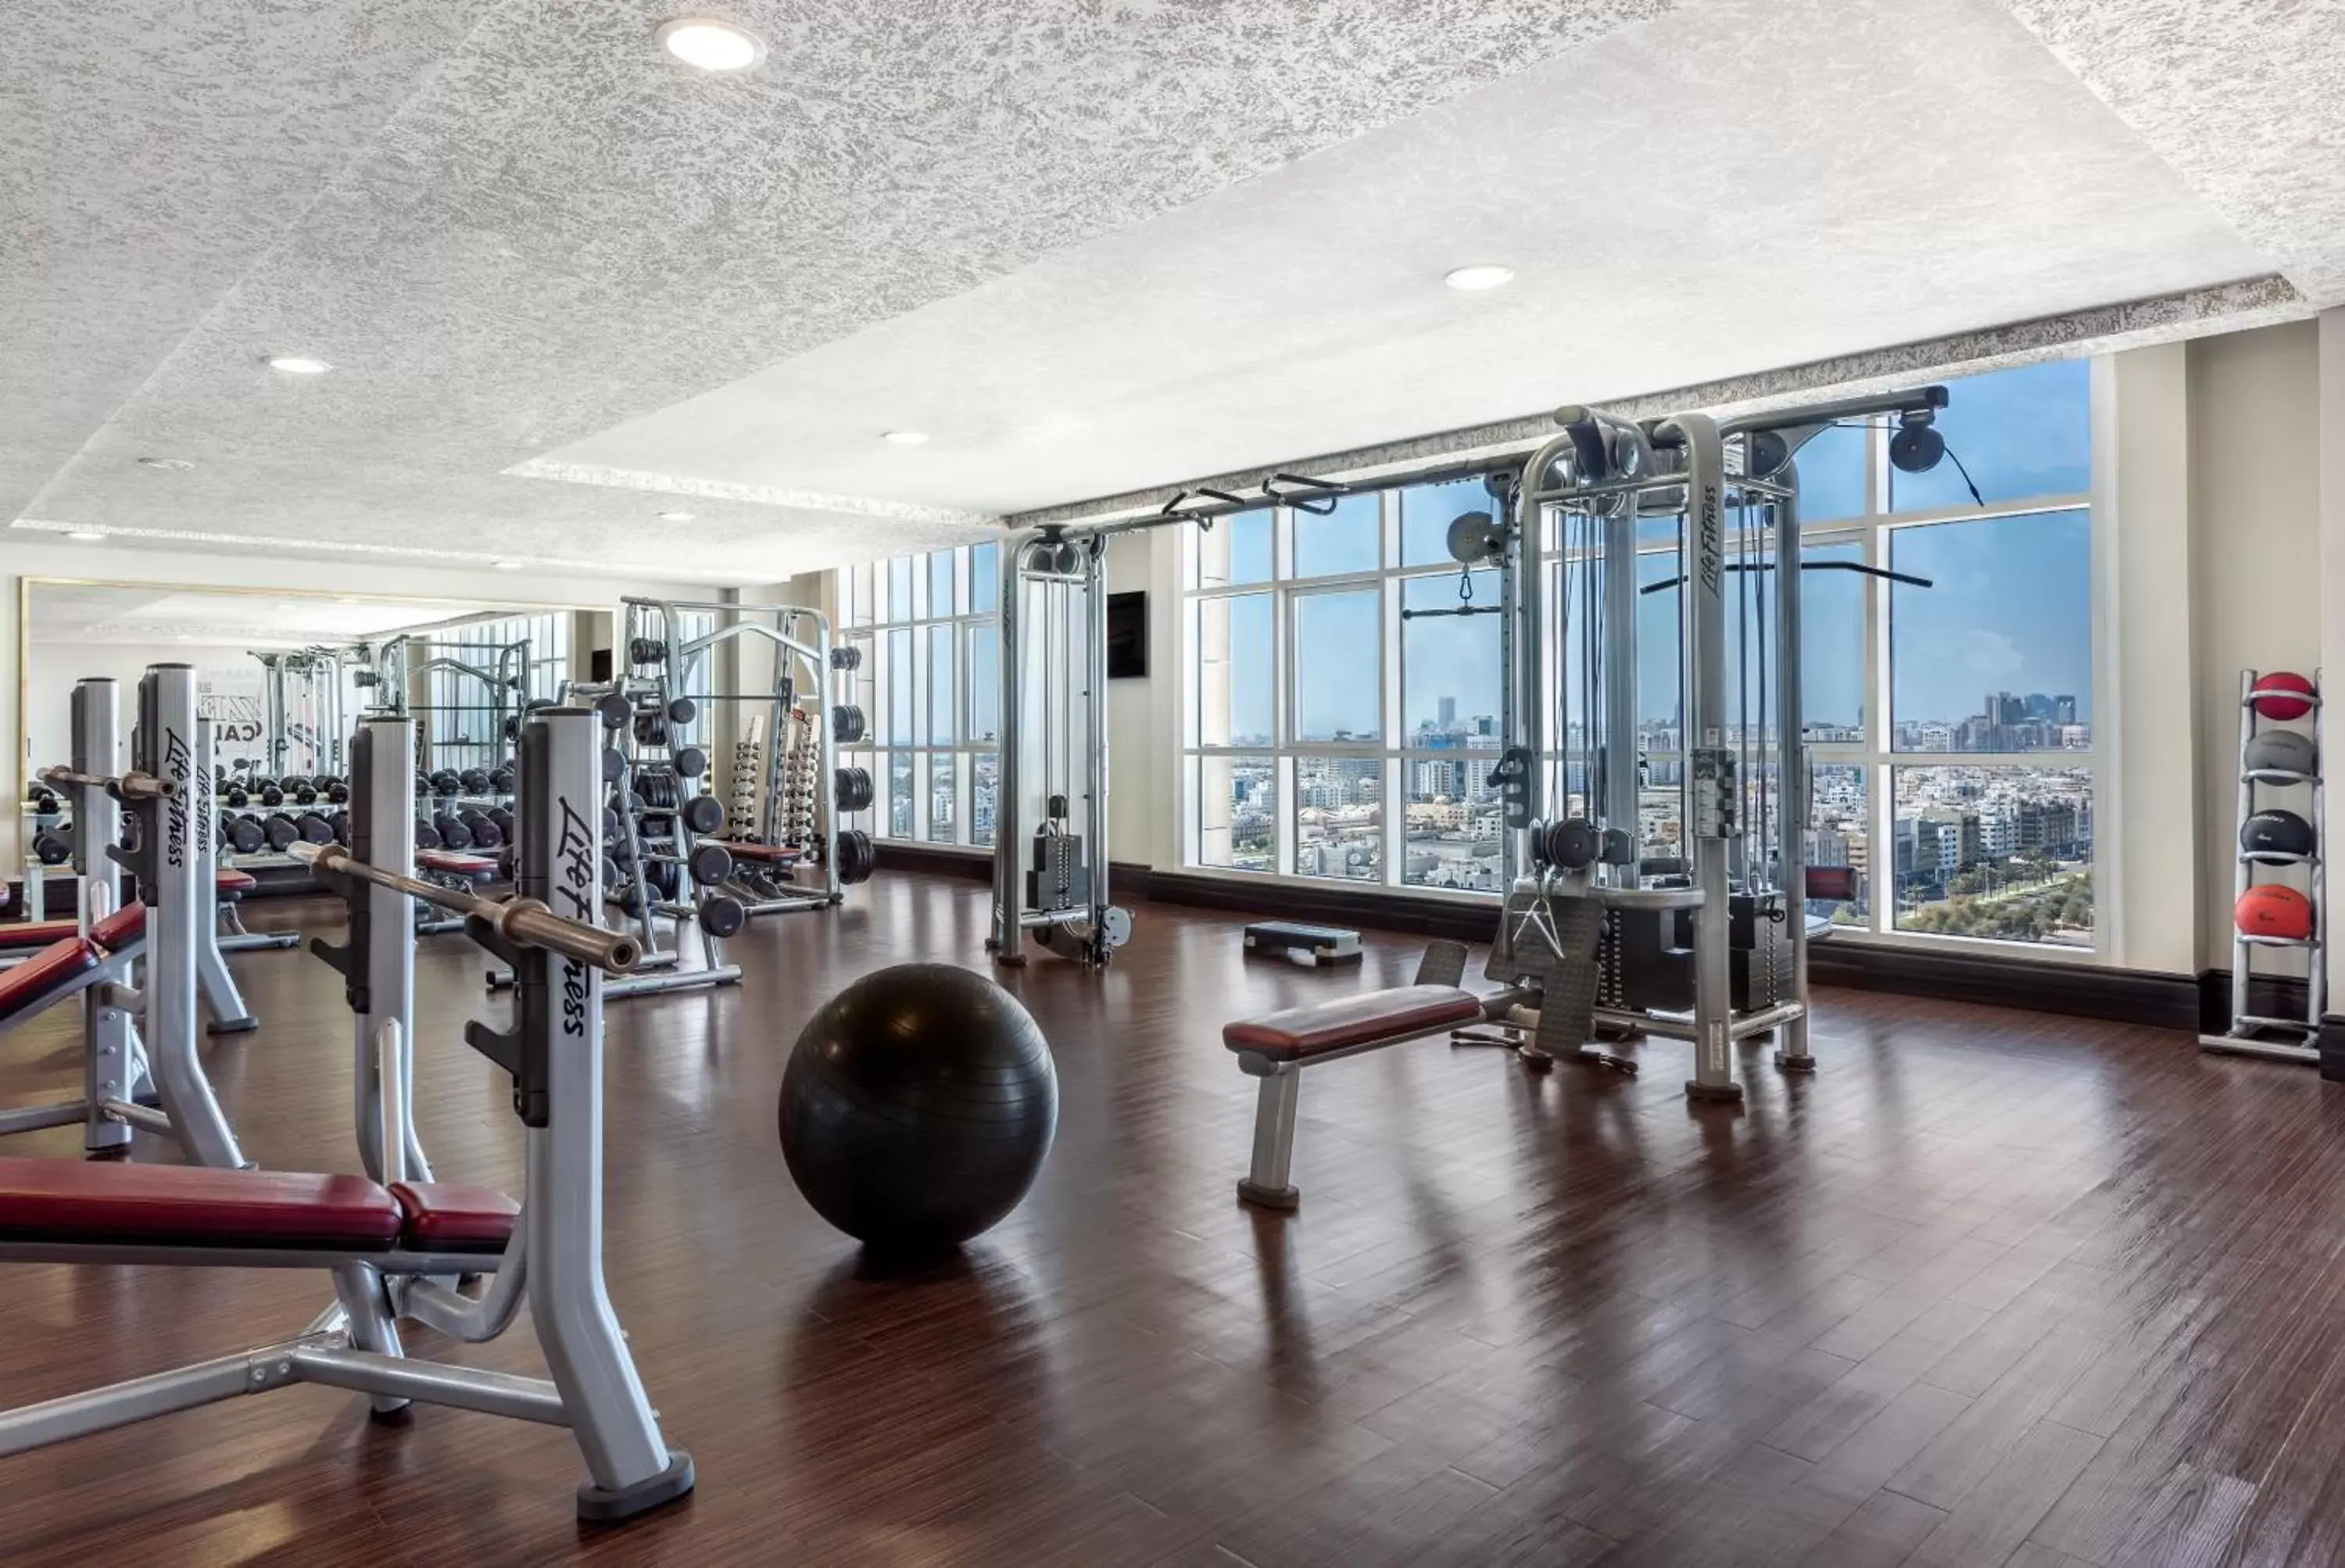 Fitness centre/facilities, Fitness Center/Facilities in Dusit Thani Abu Dhabi